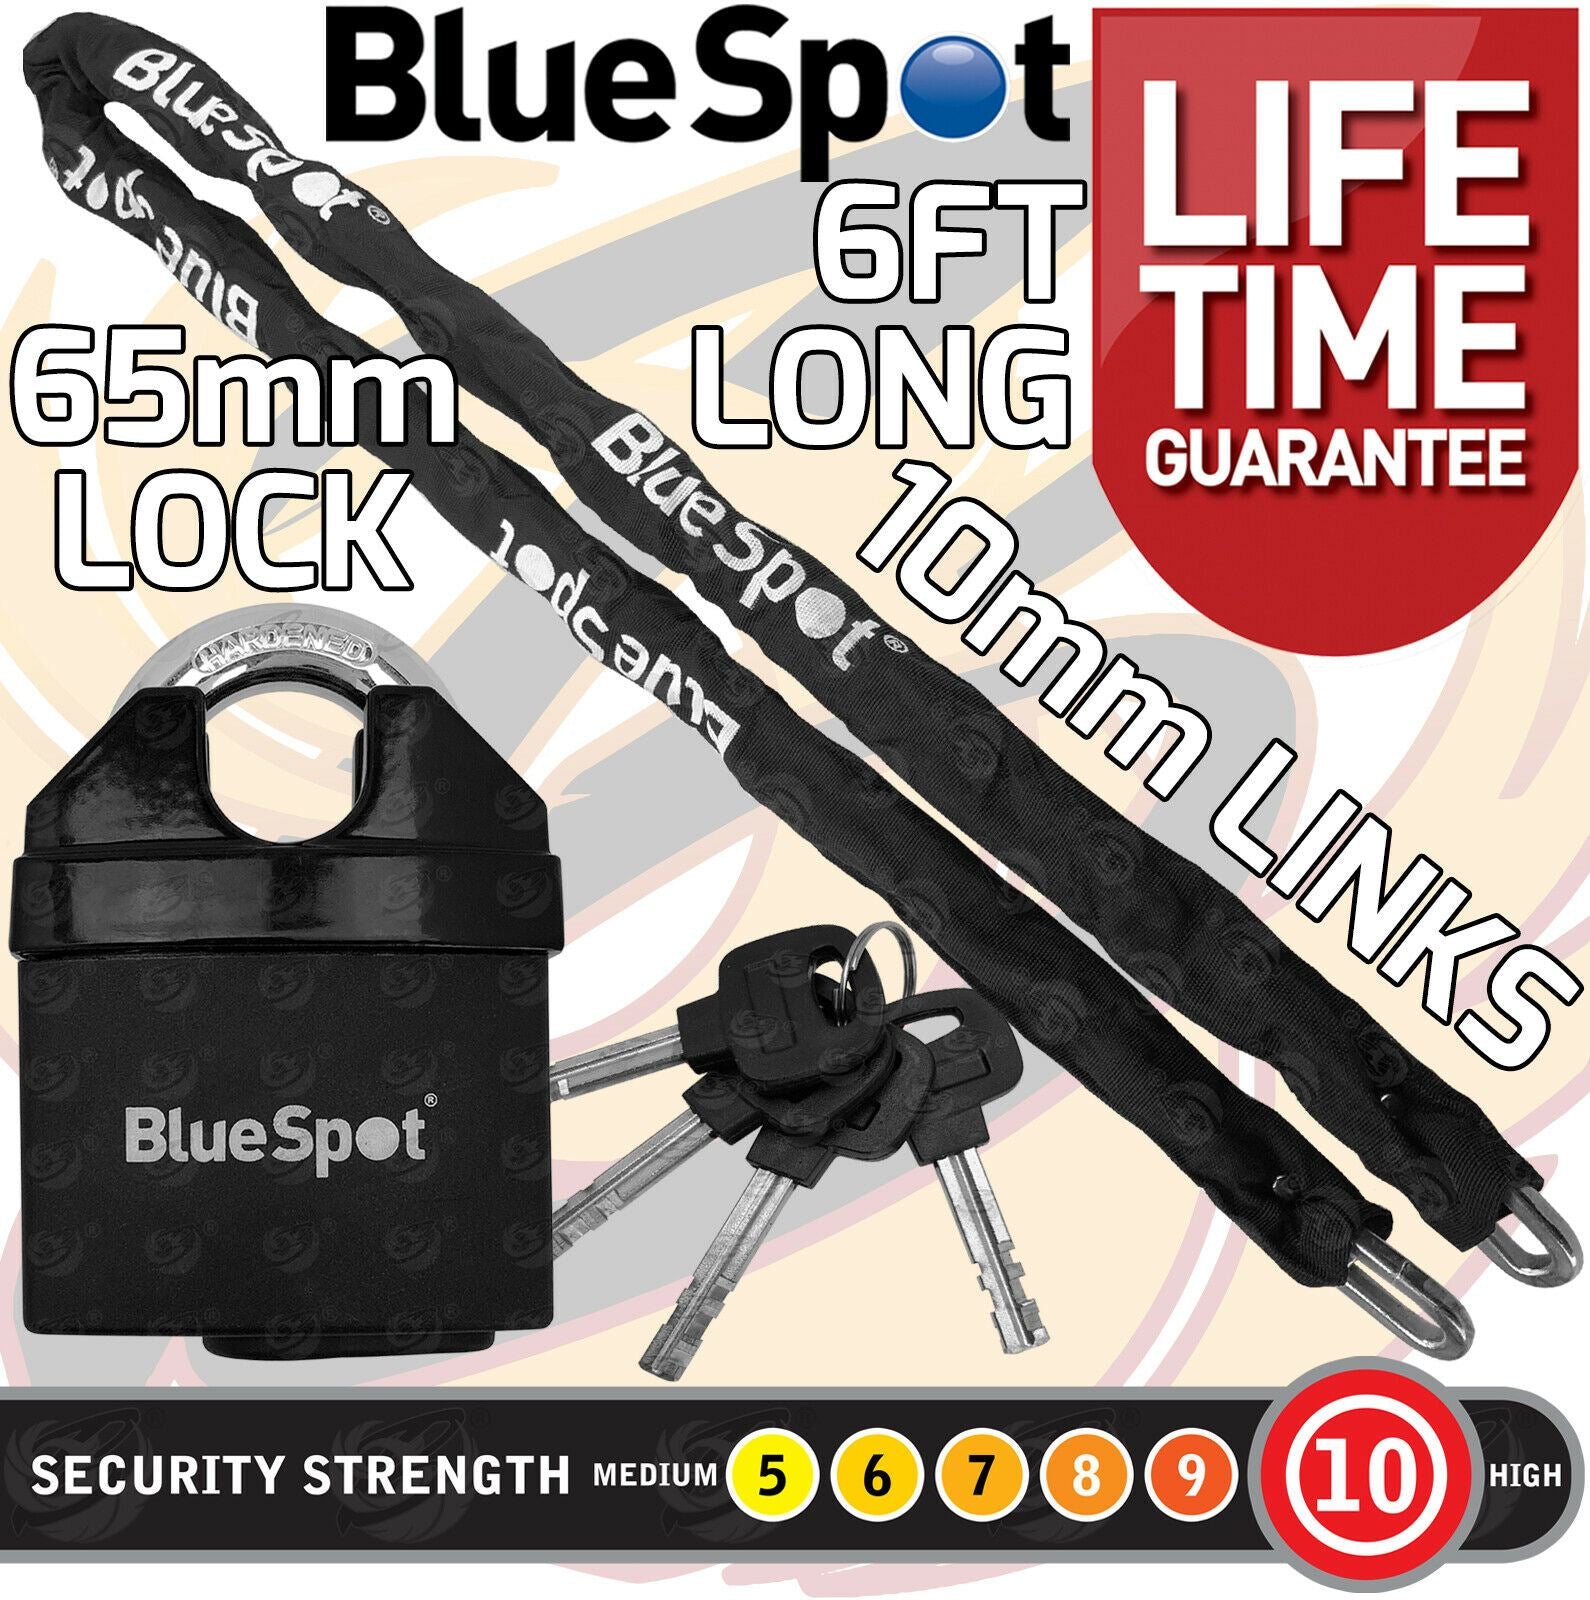 BLUESPOT 6FT LONG 10MM LINKS SECURITY CHAIN WITH 65MM HIGH SECURITY PADLOCK